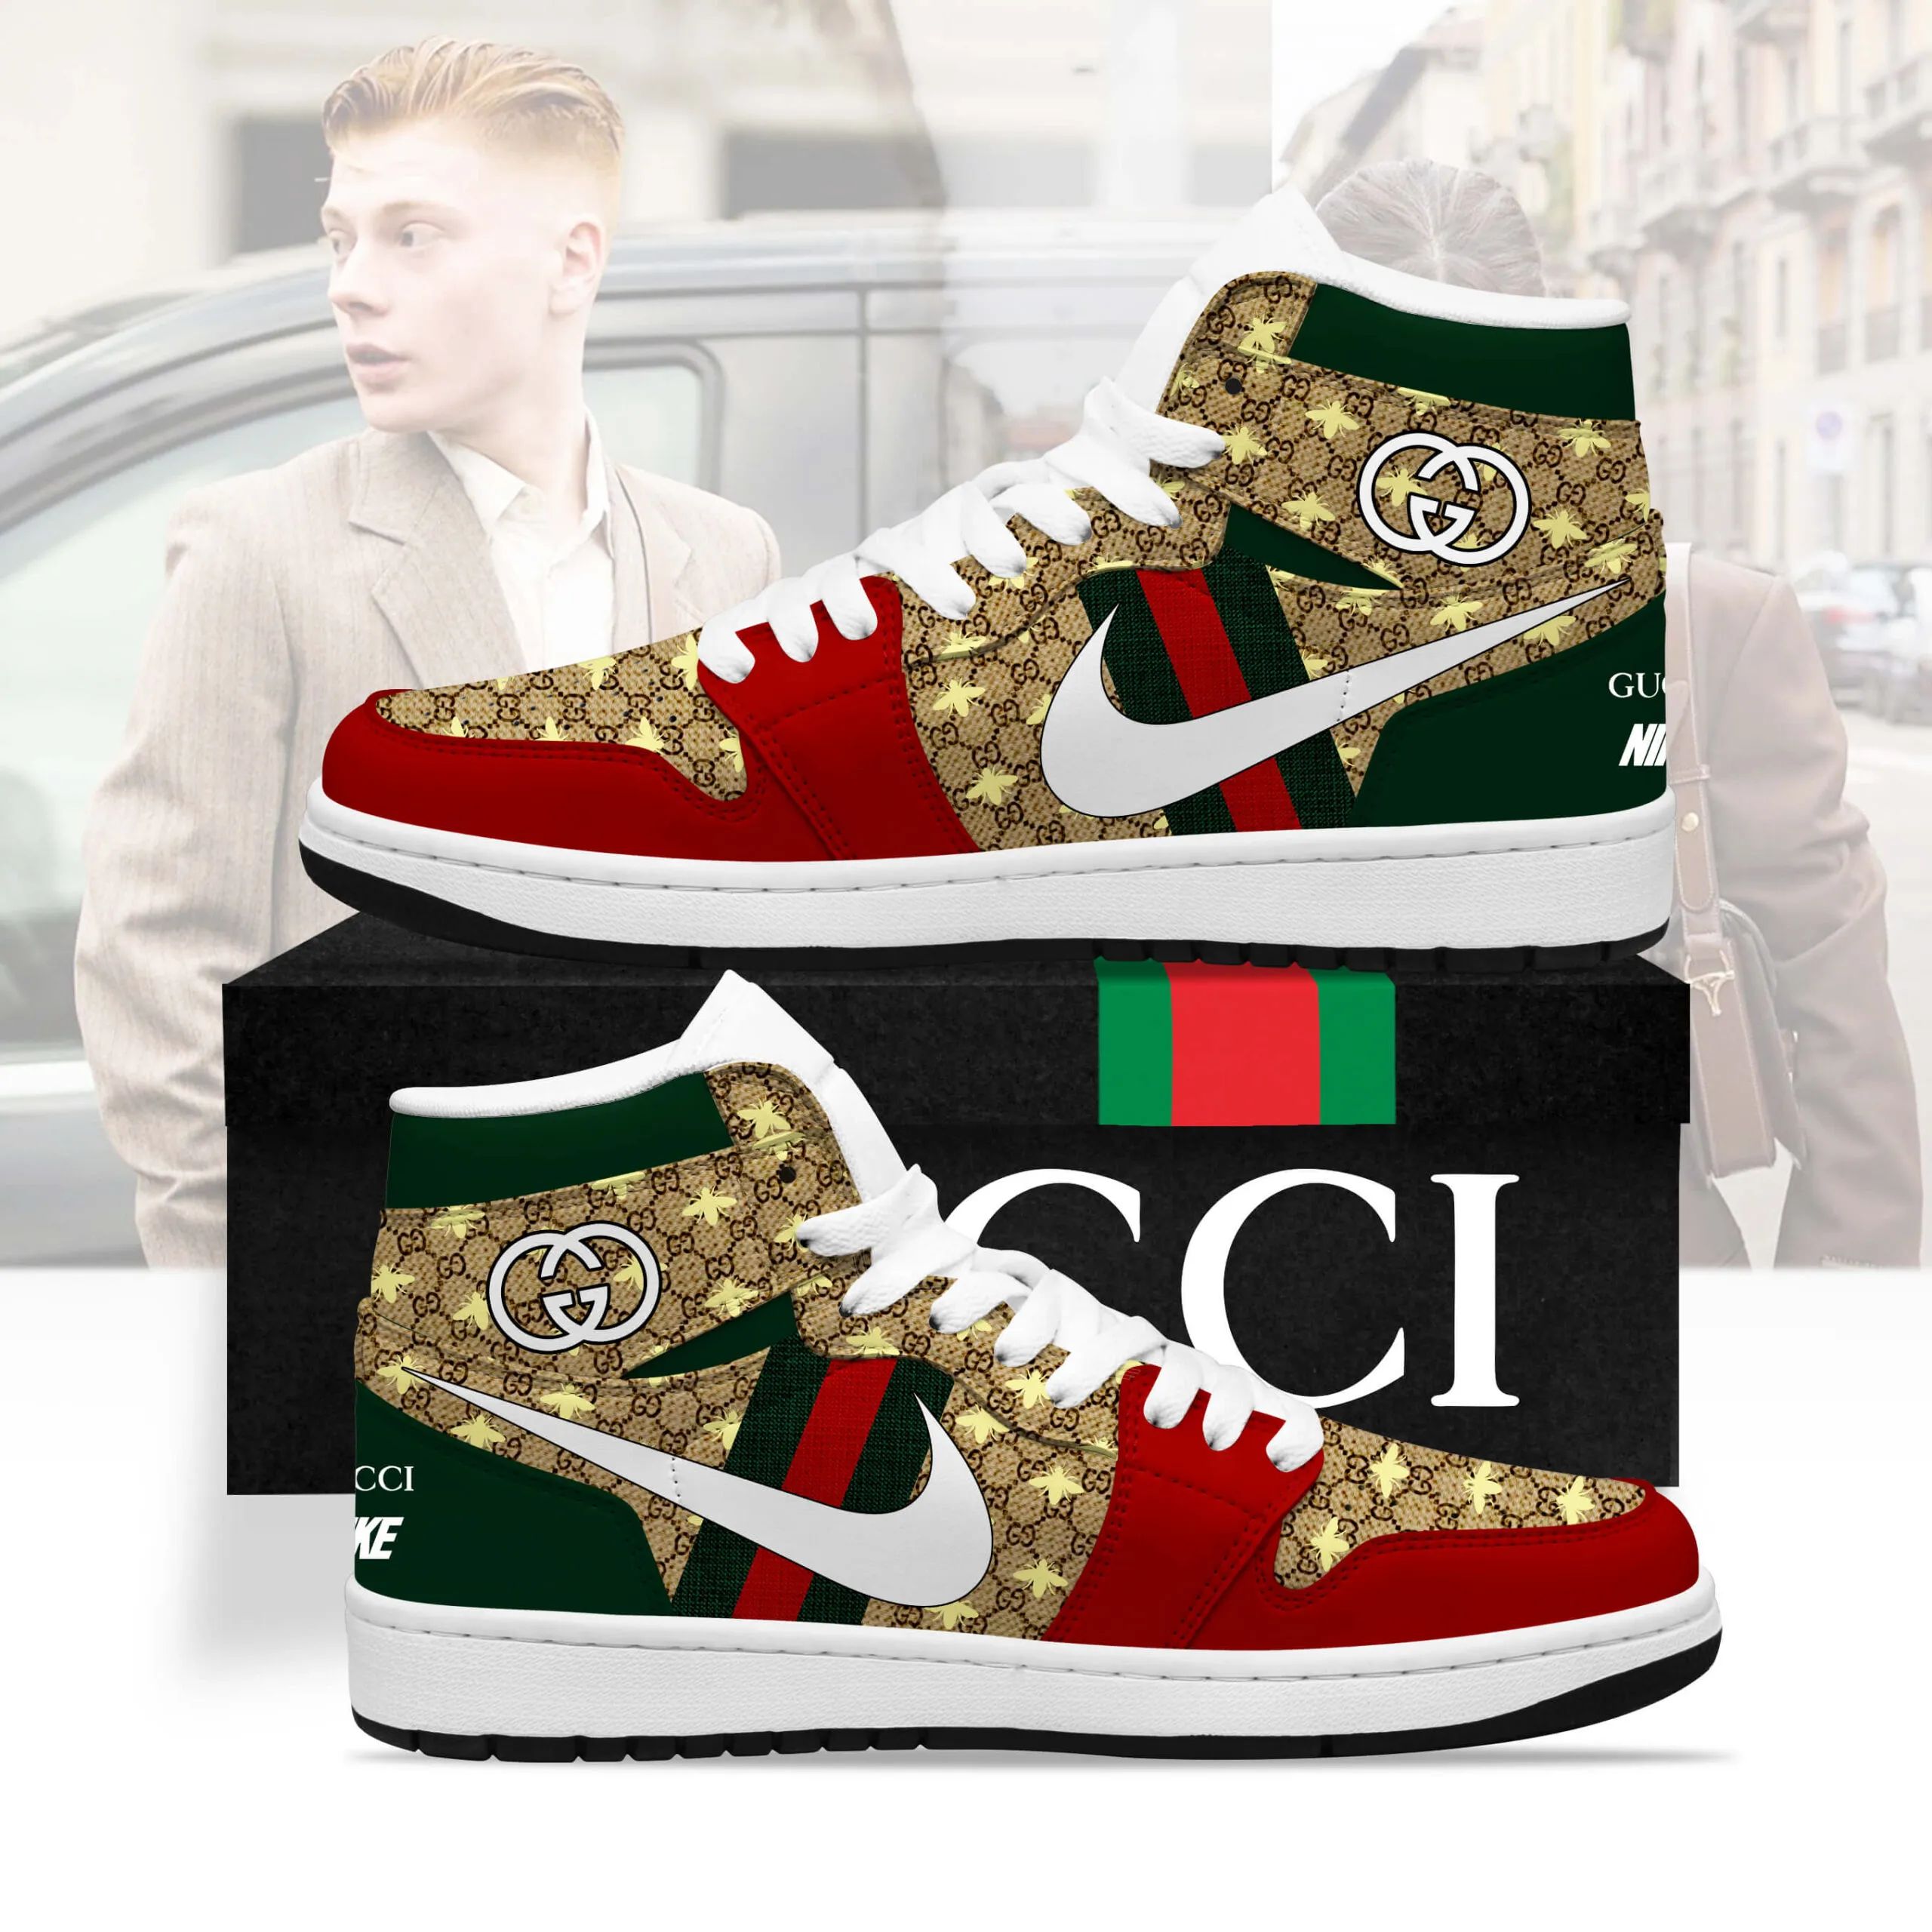 Gucci Golden Bees High Air Jordan Sneakers Shoes Luxury Fashion Brand